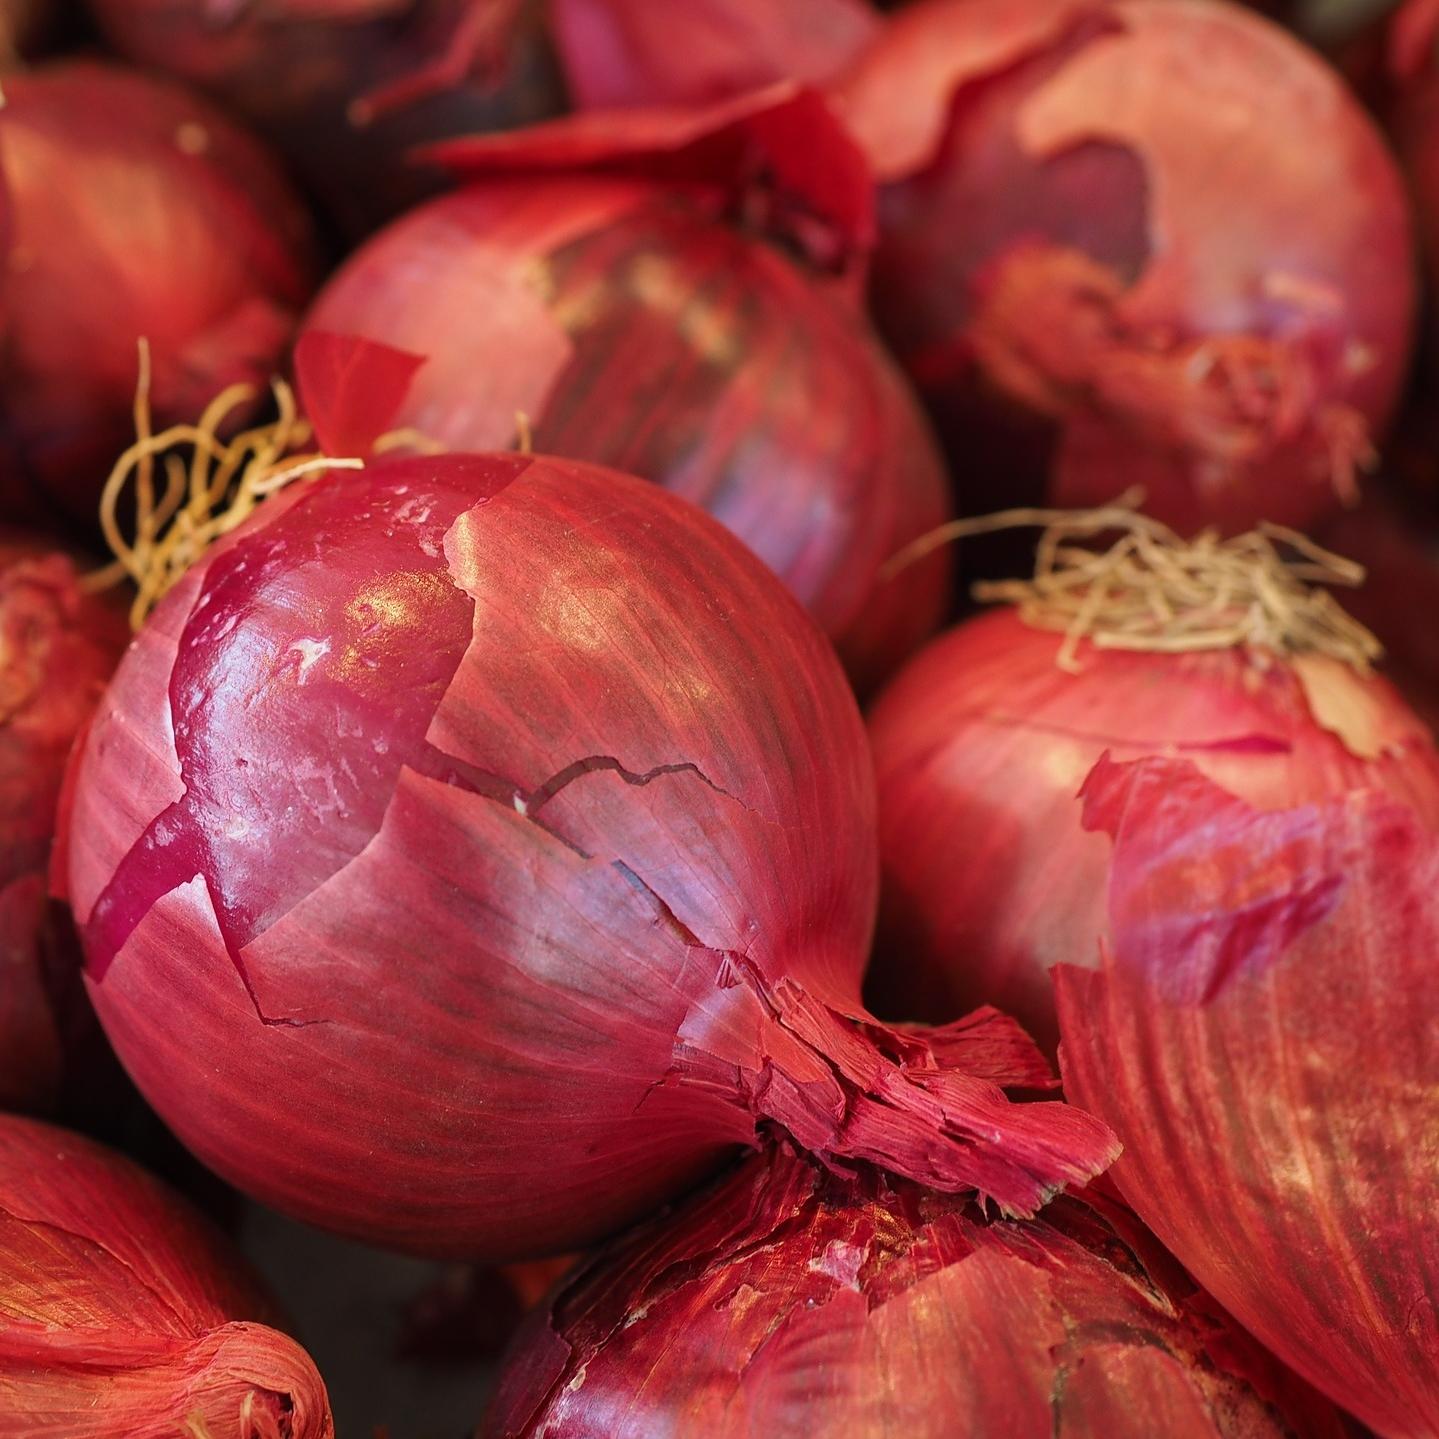 1Kg of Red Onions